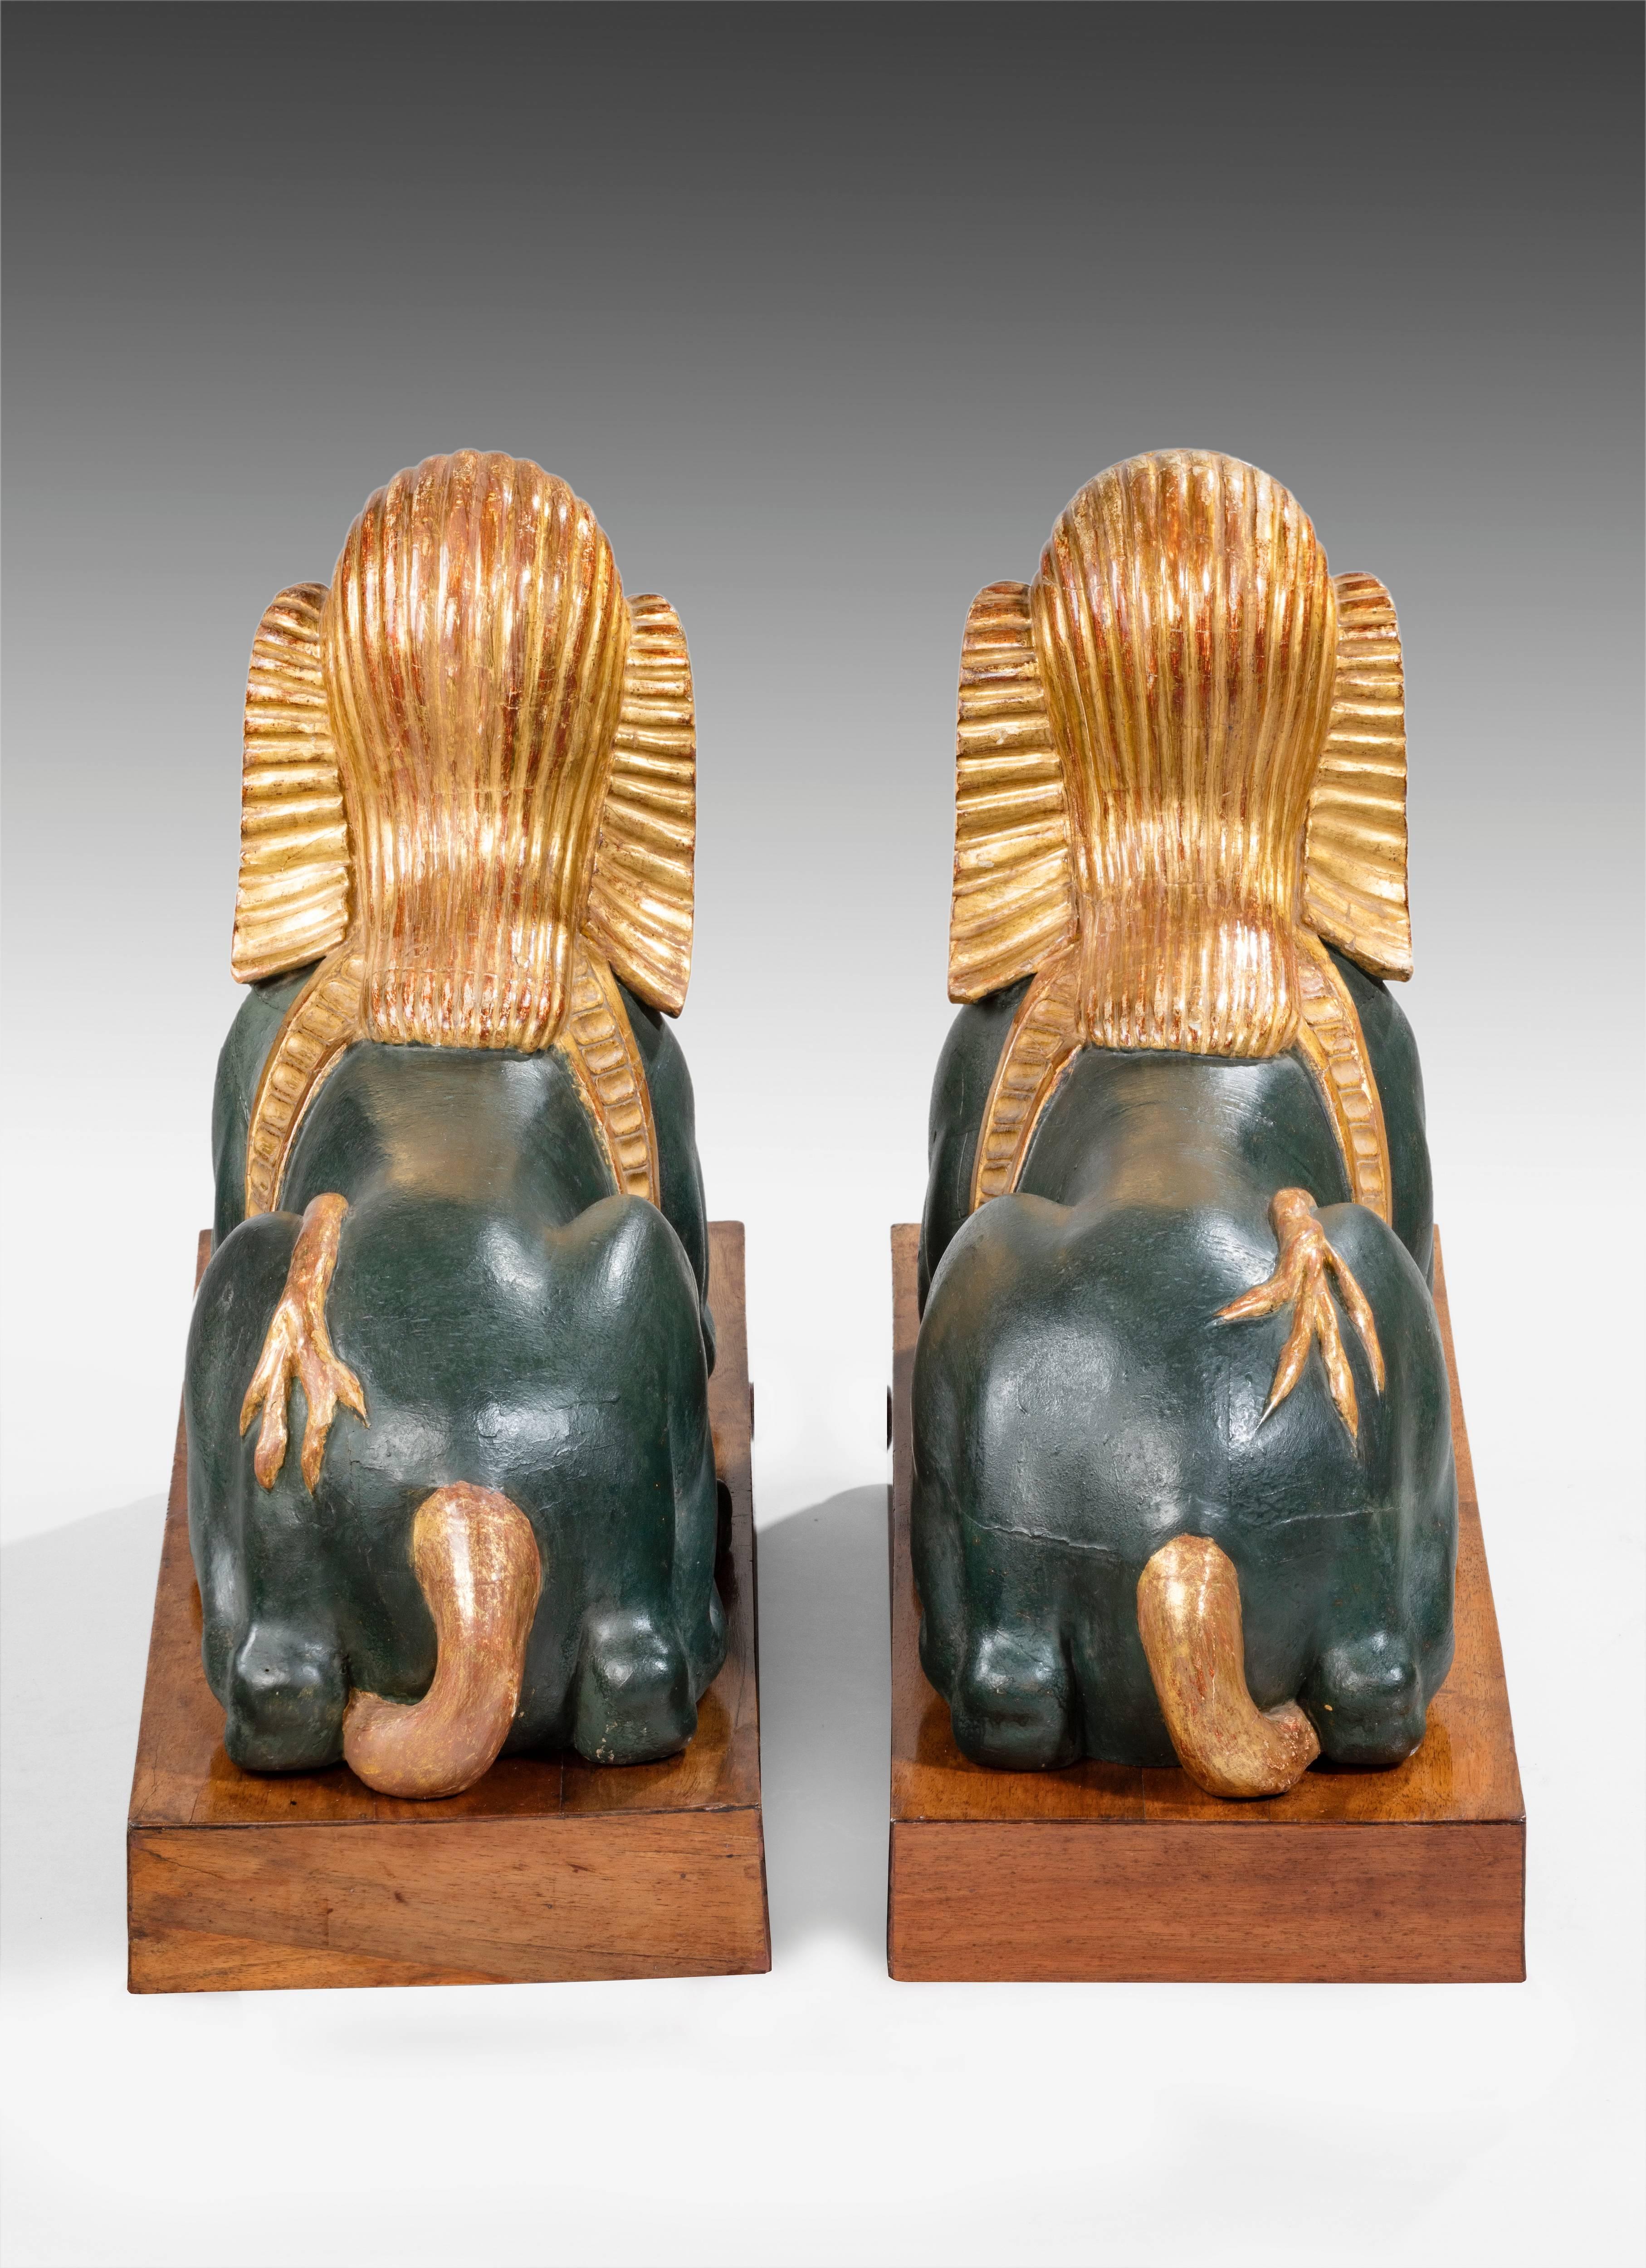 Spanish Pair of Carved Wood, Gesso, Polychrome and Gilt Decorated Egyptomania Sphinxes